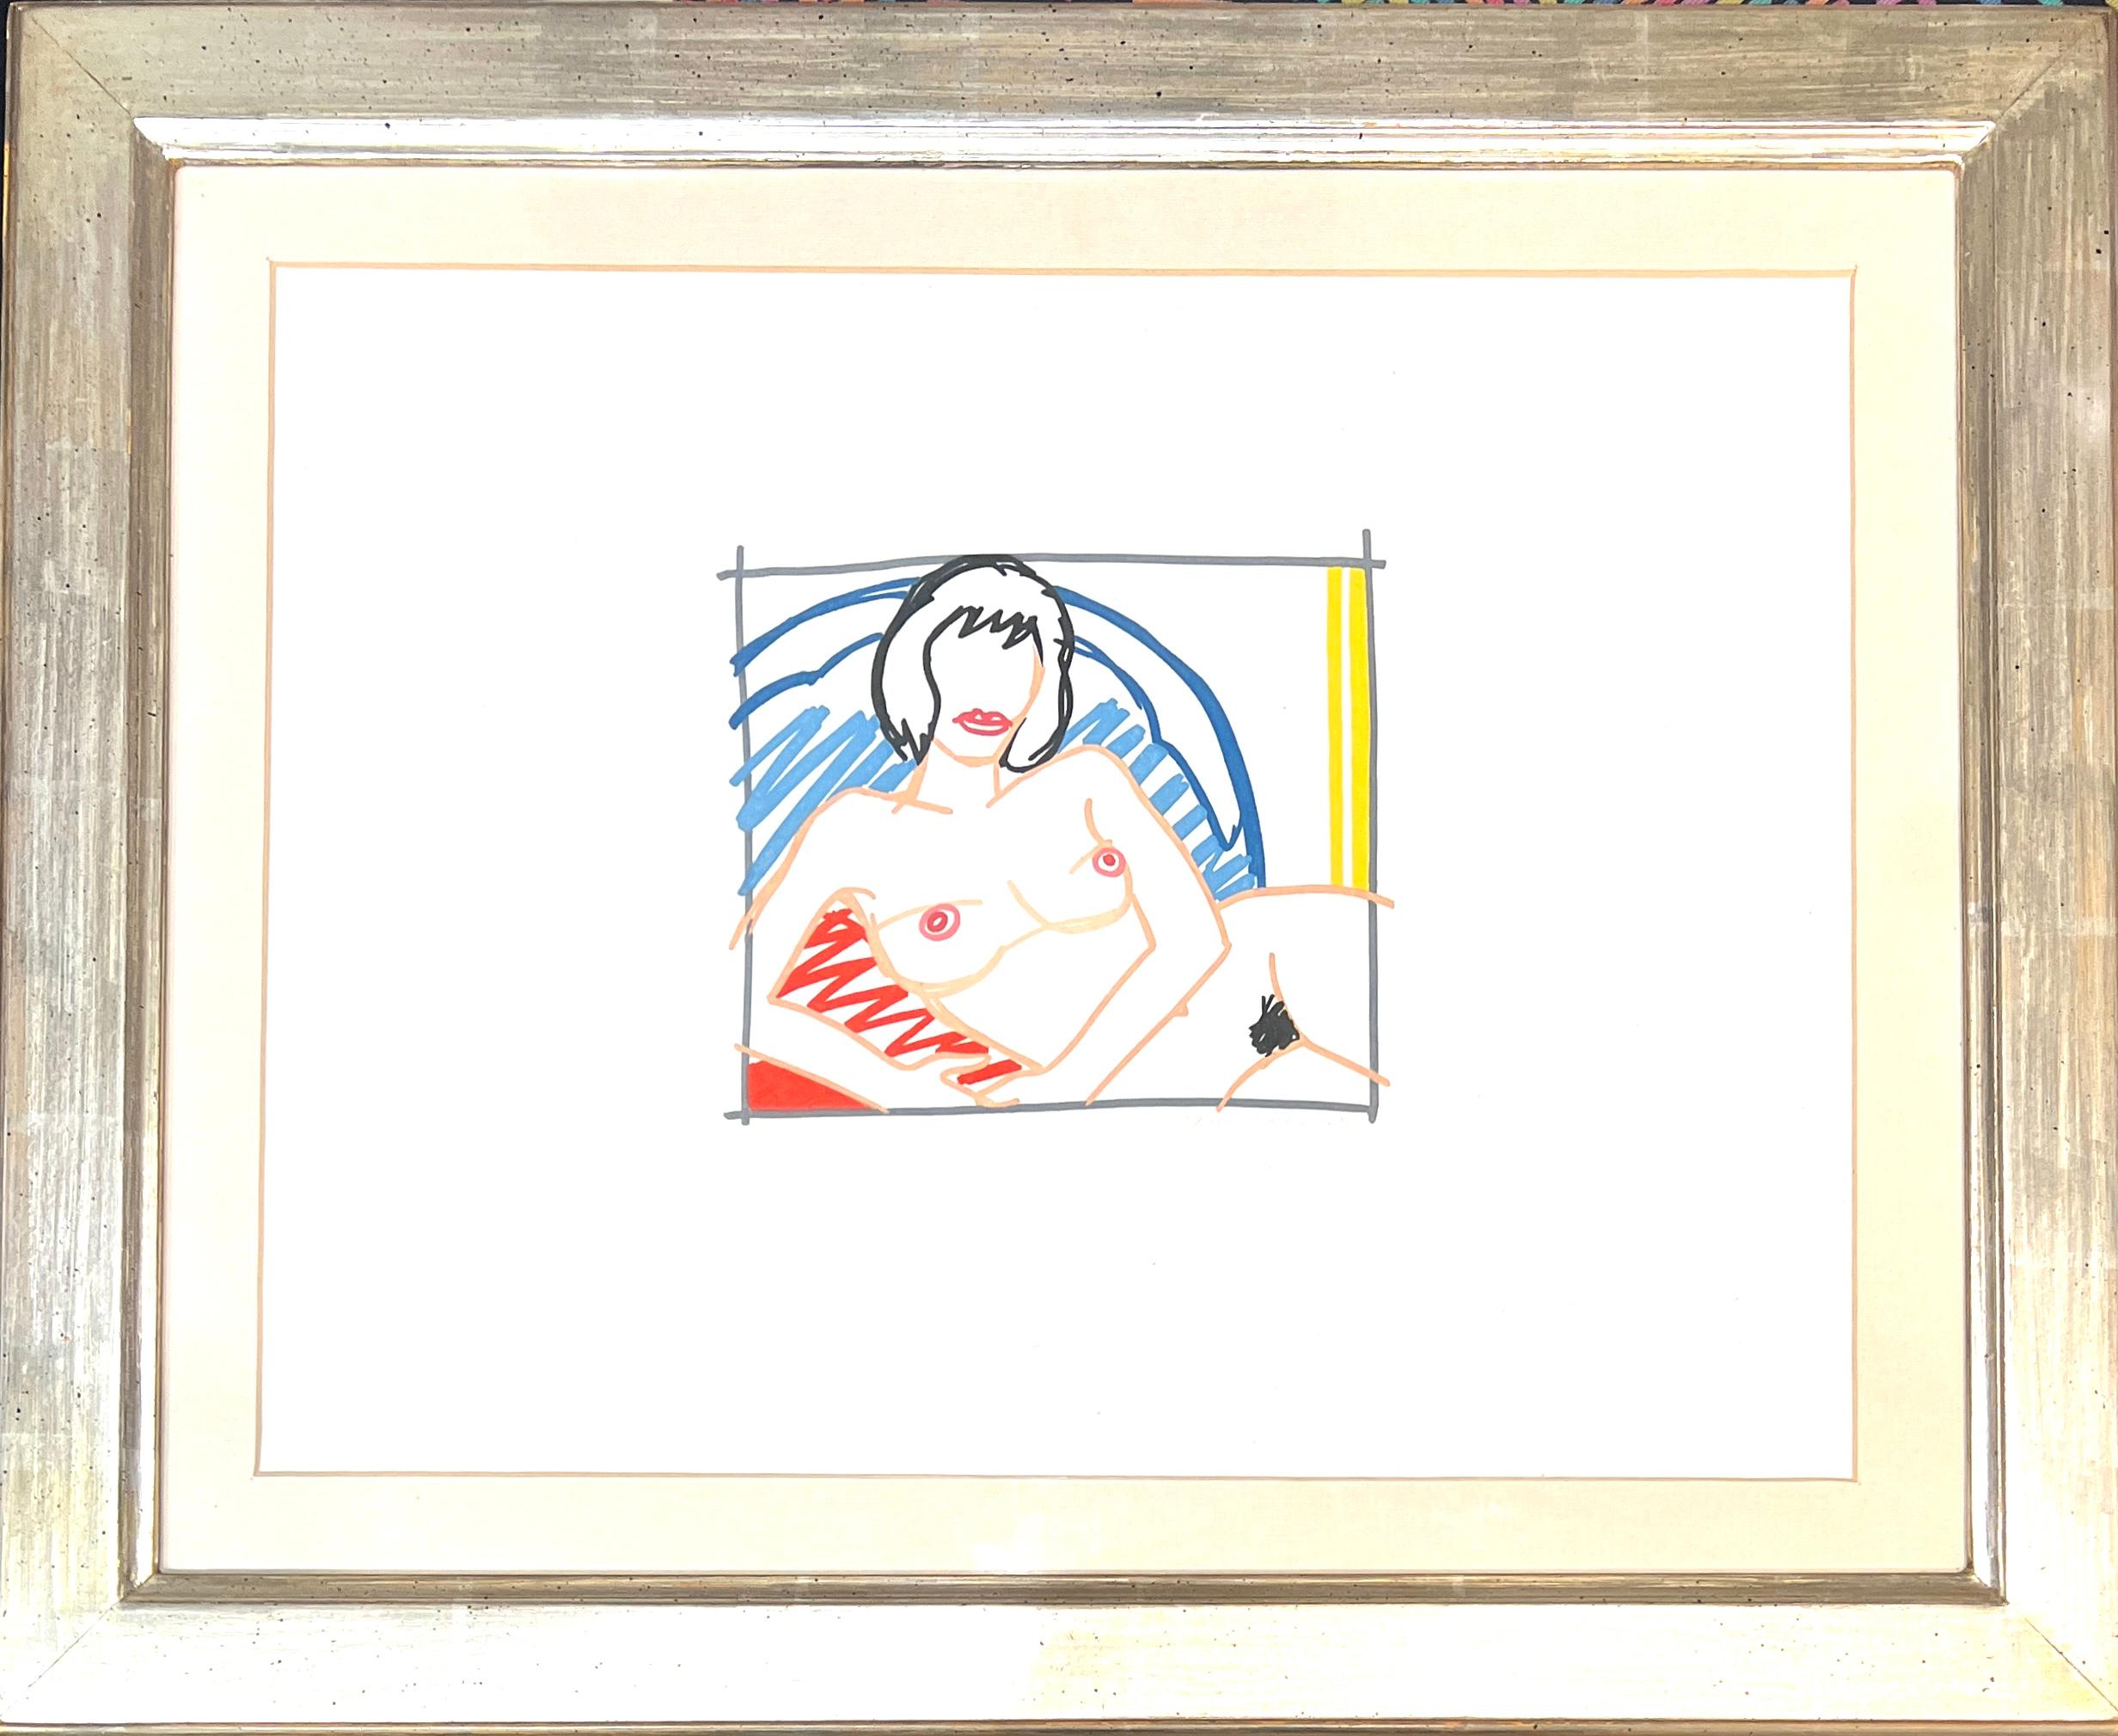 Monica Nude with Yellow Curtain
Aquatint in colors on wove paper , Edited in 1991
Limited edition of 50 copies
signed in pencil by artist and numbered 21/50 in lower right corner
paper size: 37.8 x 43.8cm ( 14 7/8 x 17 1/4in )
framed size: 47 x 57,5